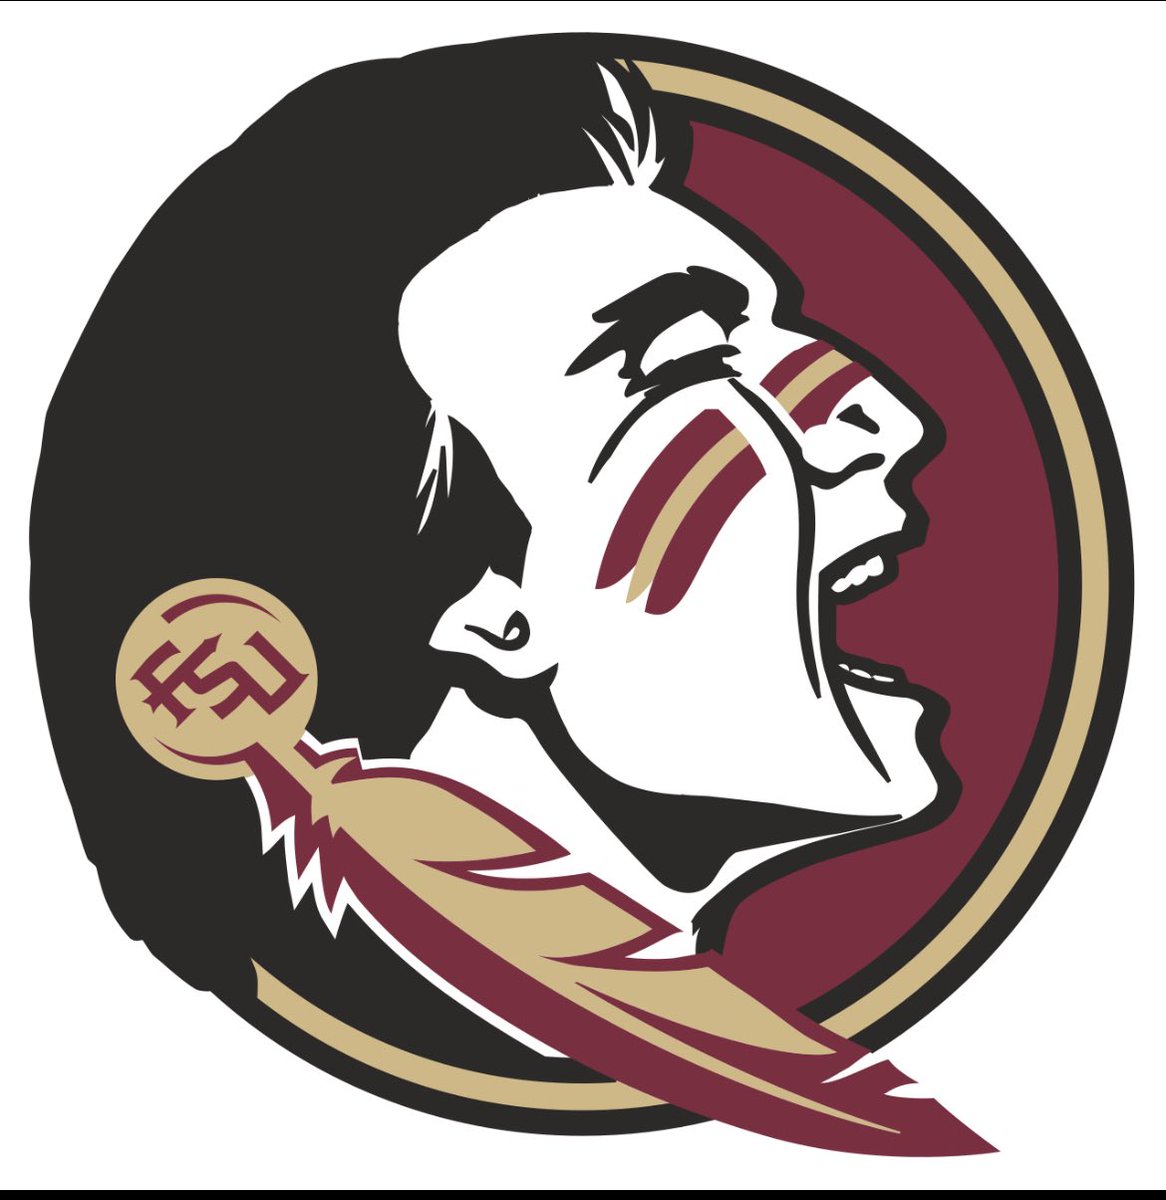 Beyond blessed to receive a offer from Florida State University @Coach_Norvell @RyanBartow @CoachCoffey1 @CoachFour @BearJamaal @FSUFootball @Seminoles